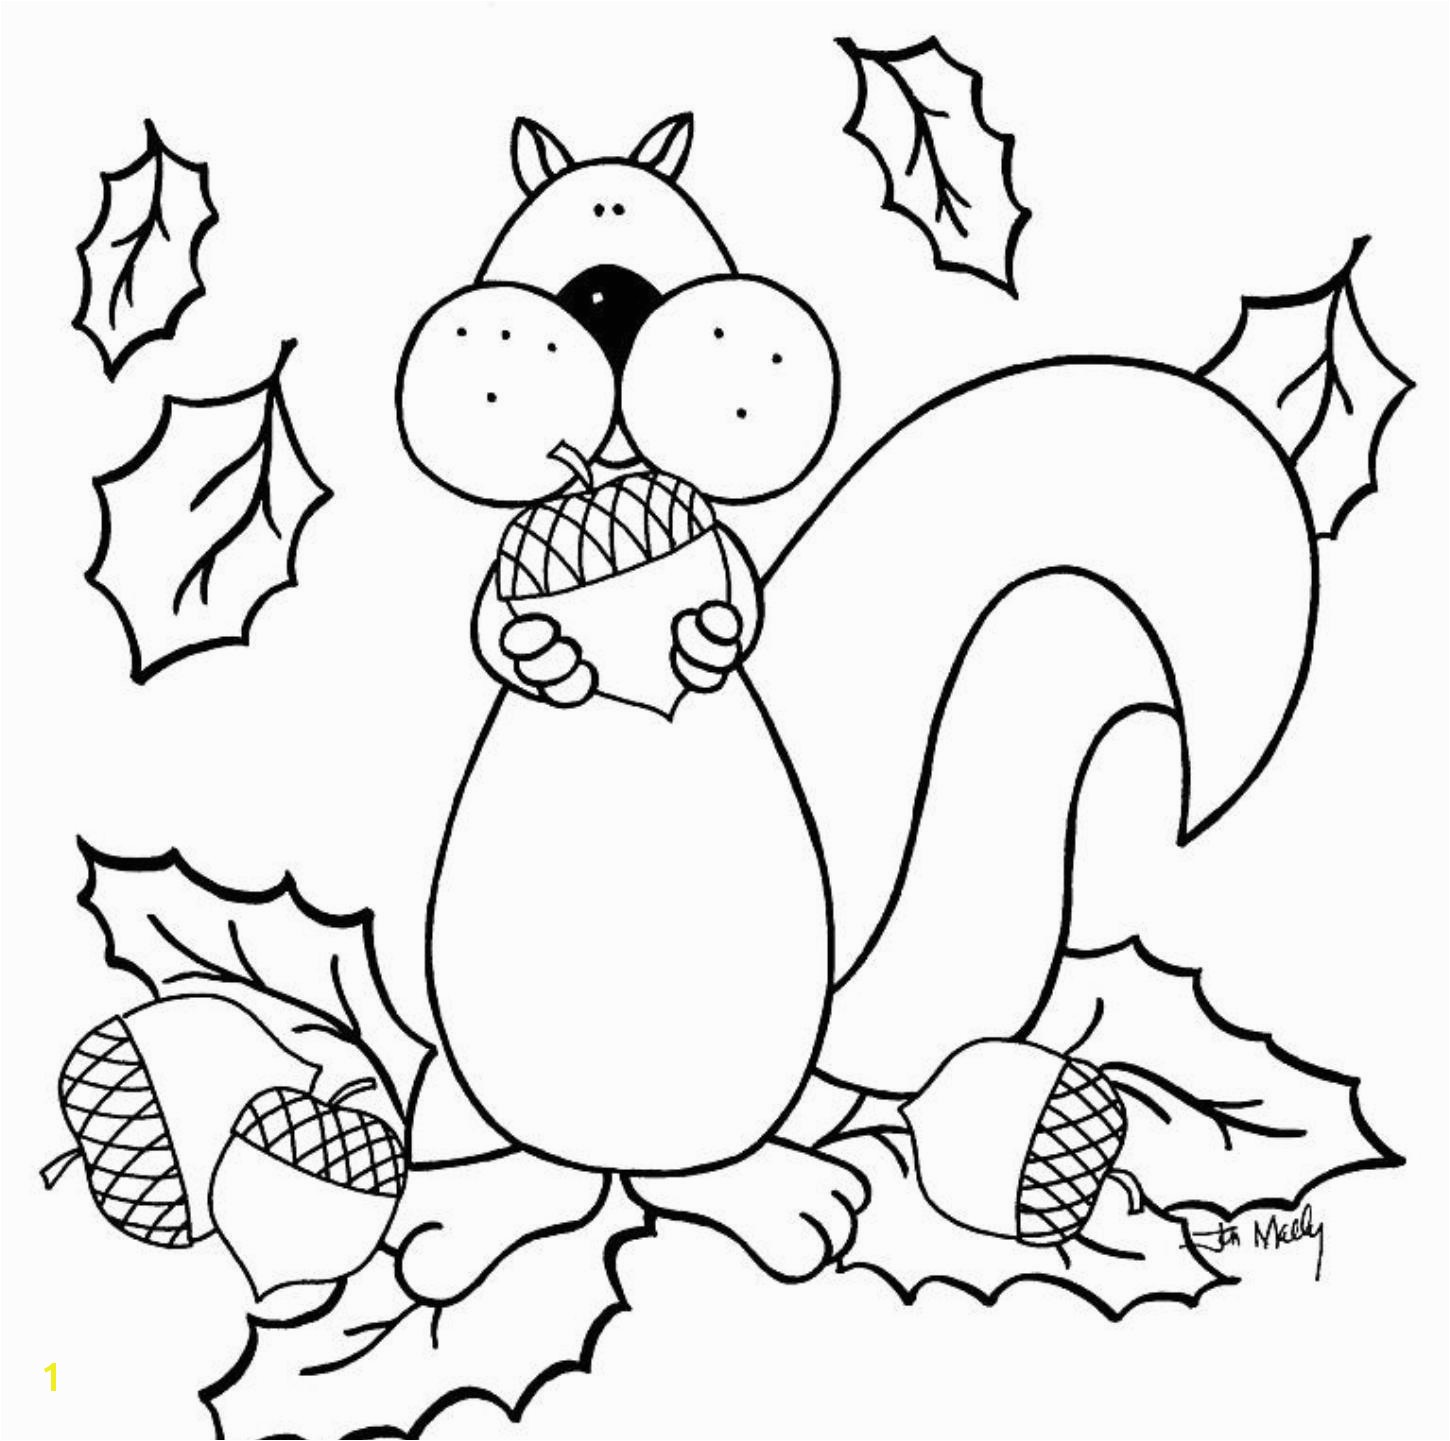 Free Color Sheets Animals Elegant Cool Free Coloring Pages Elegant Crayola Pages 0d Archives Se